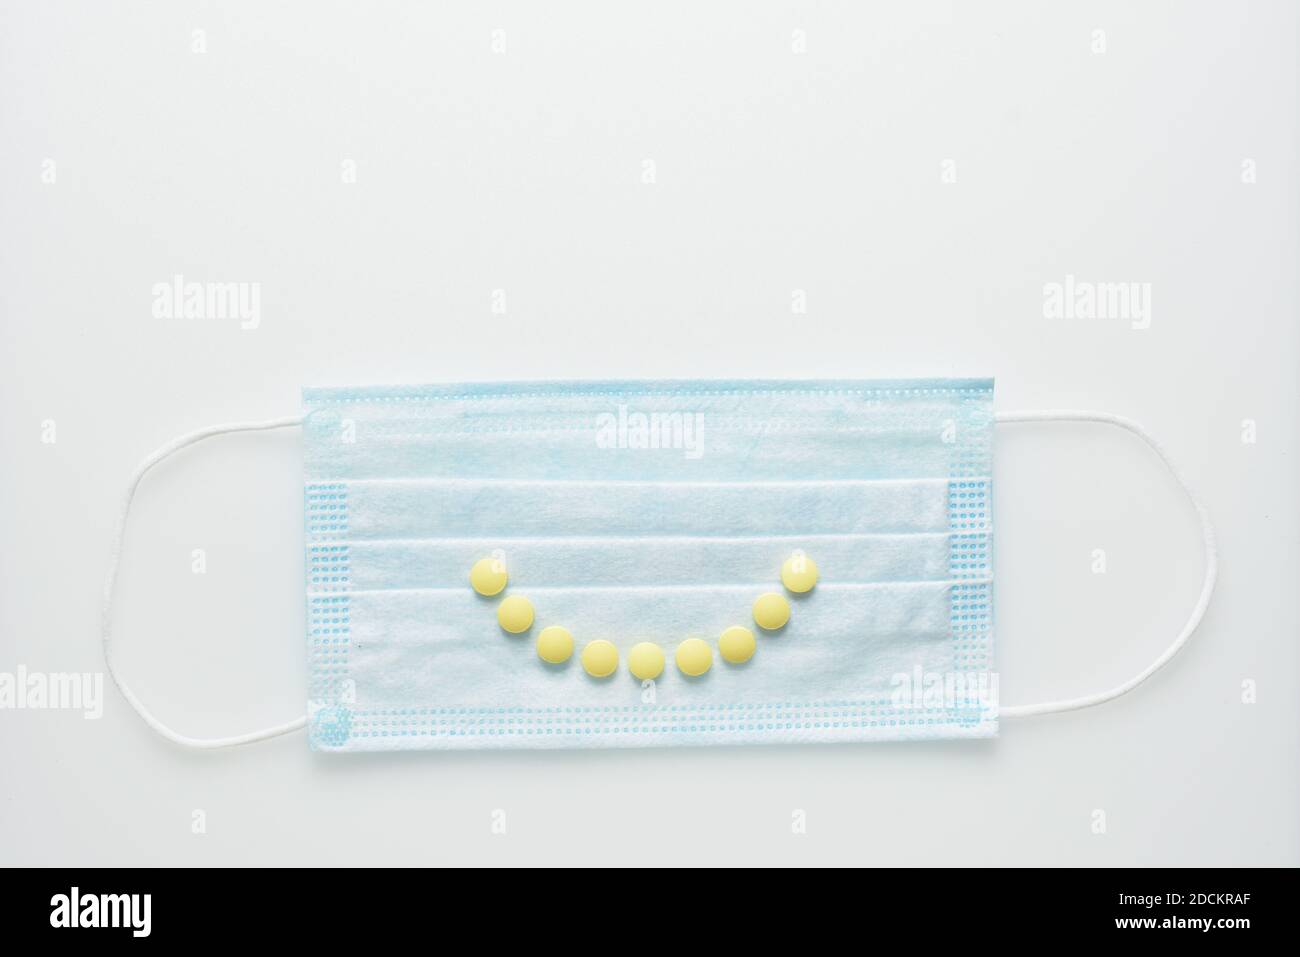 Smile from pills on face mask, concept of body support with vitamins for prevention from viruses Stock Photo